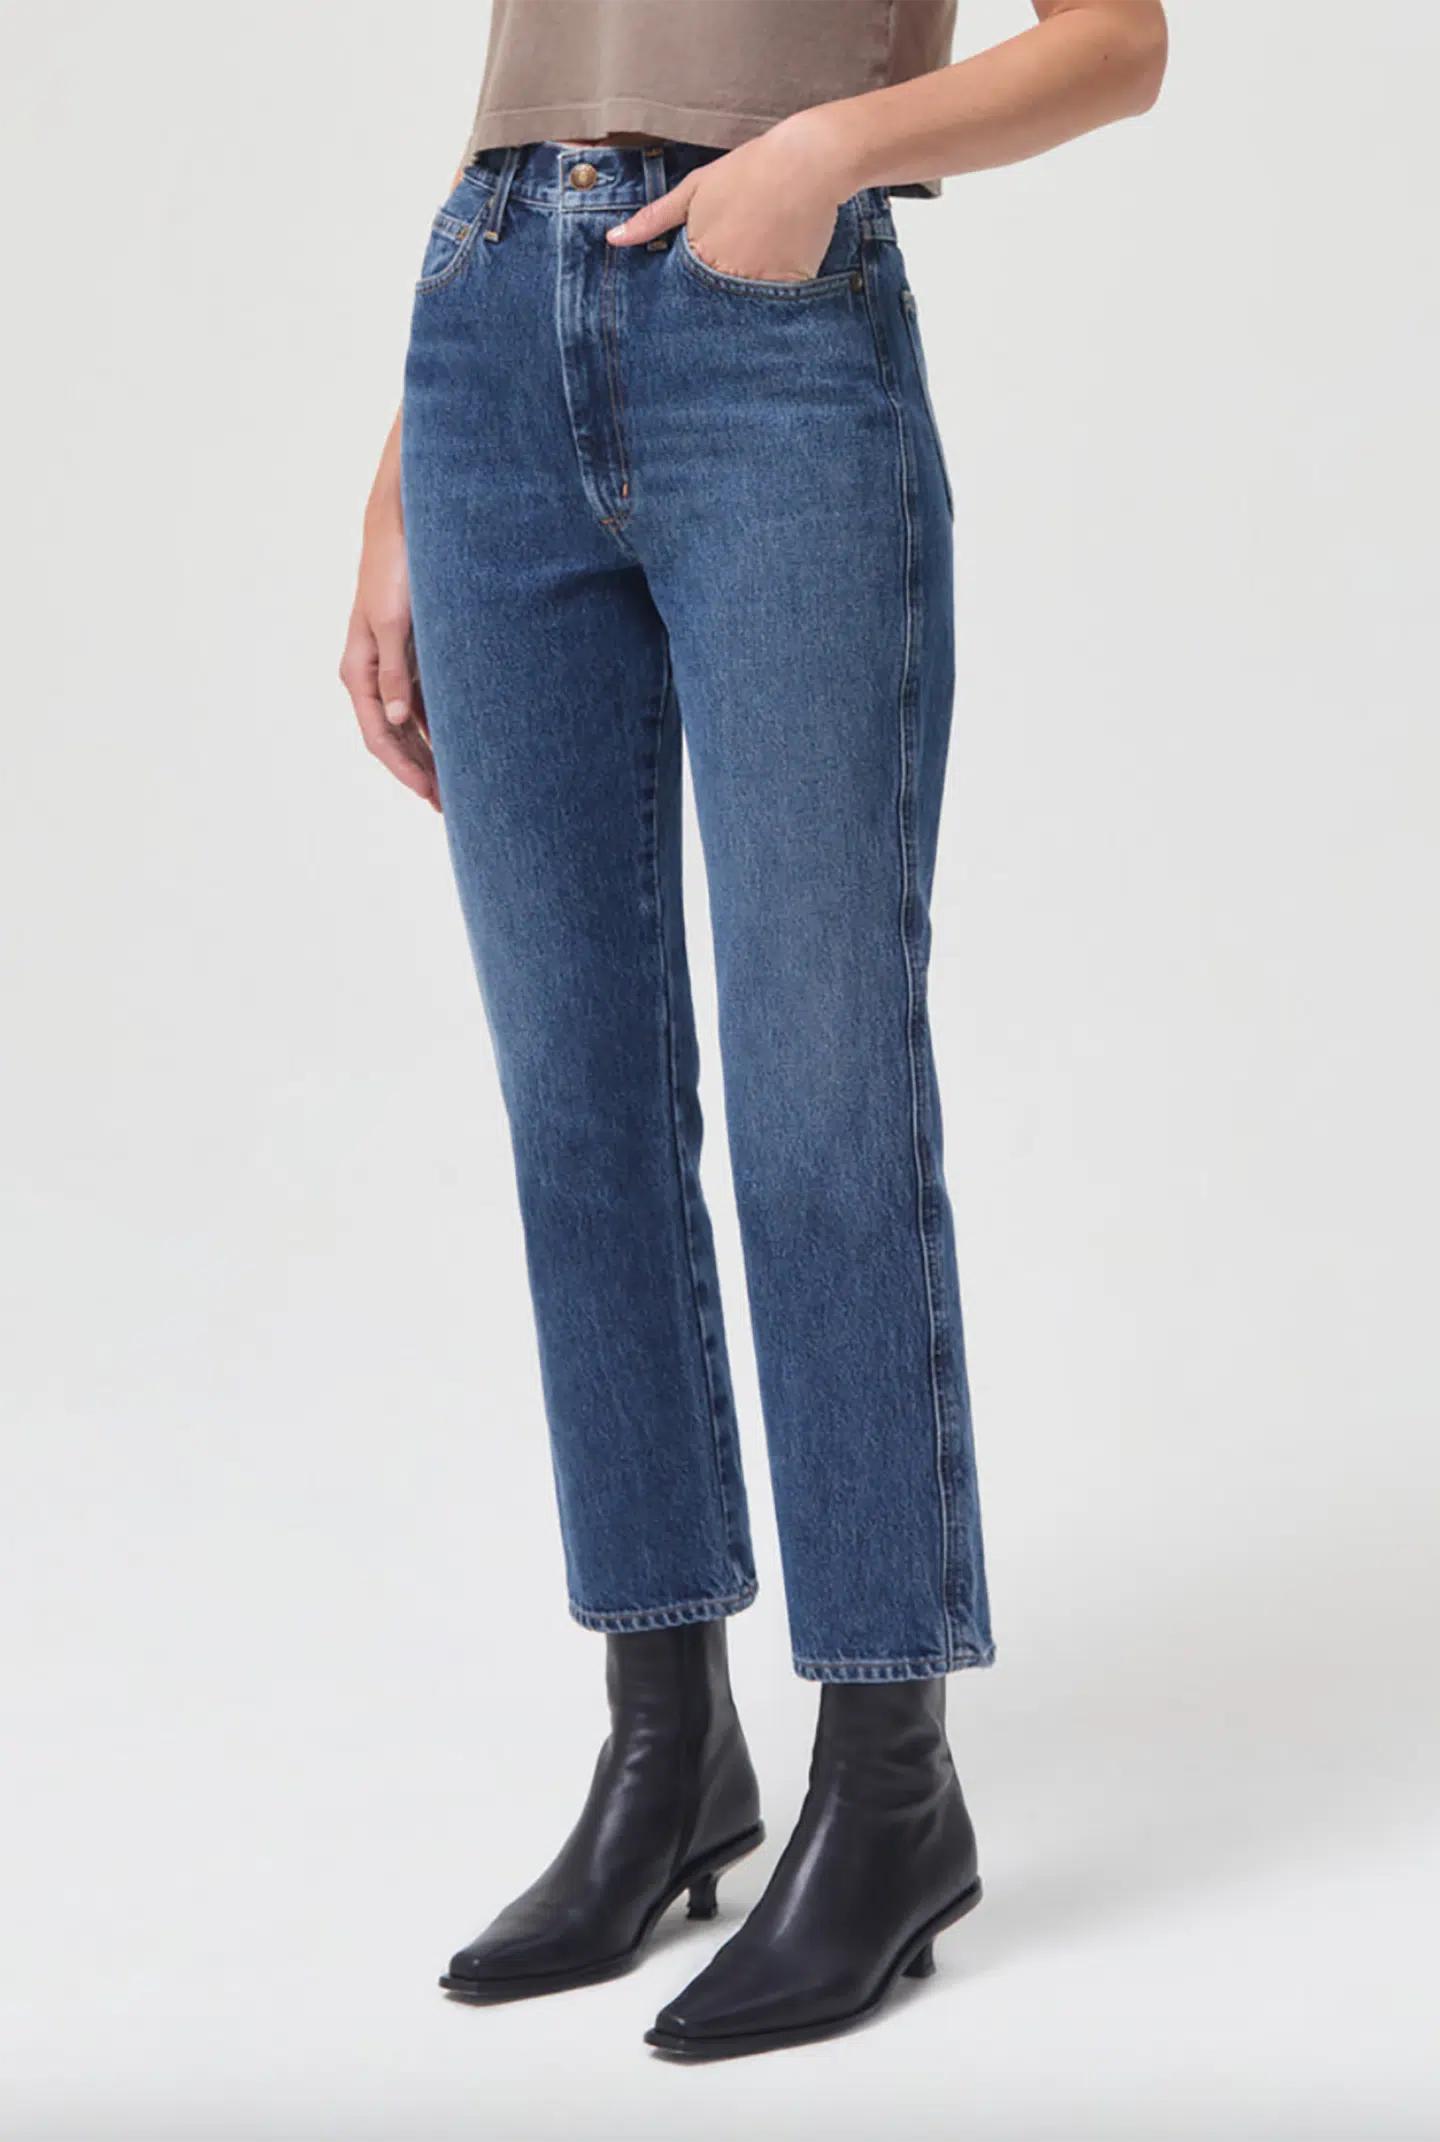 Agolde Jeans: My HONEST Thoughts